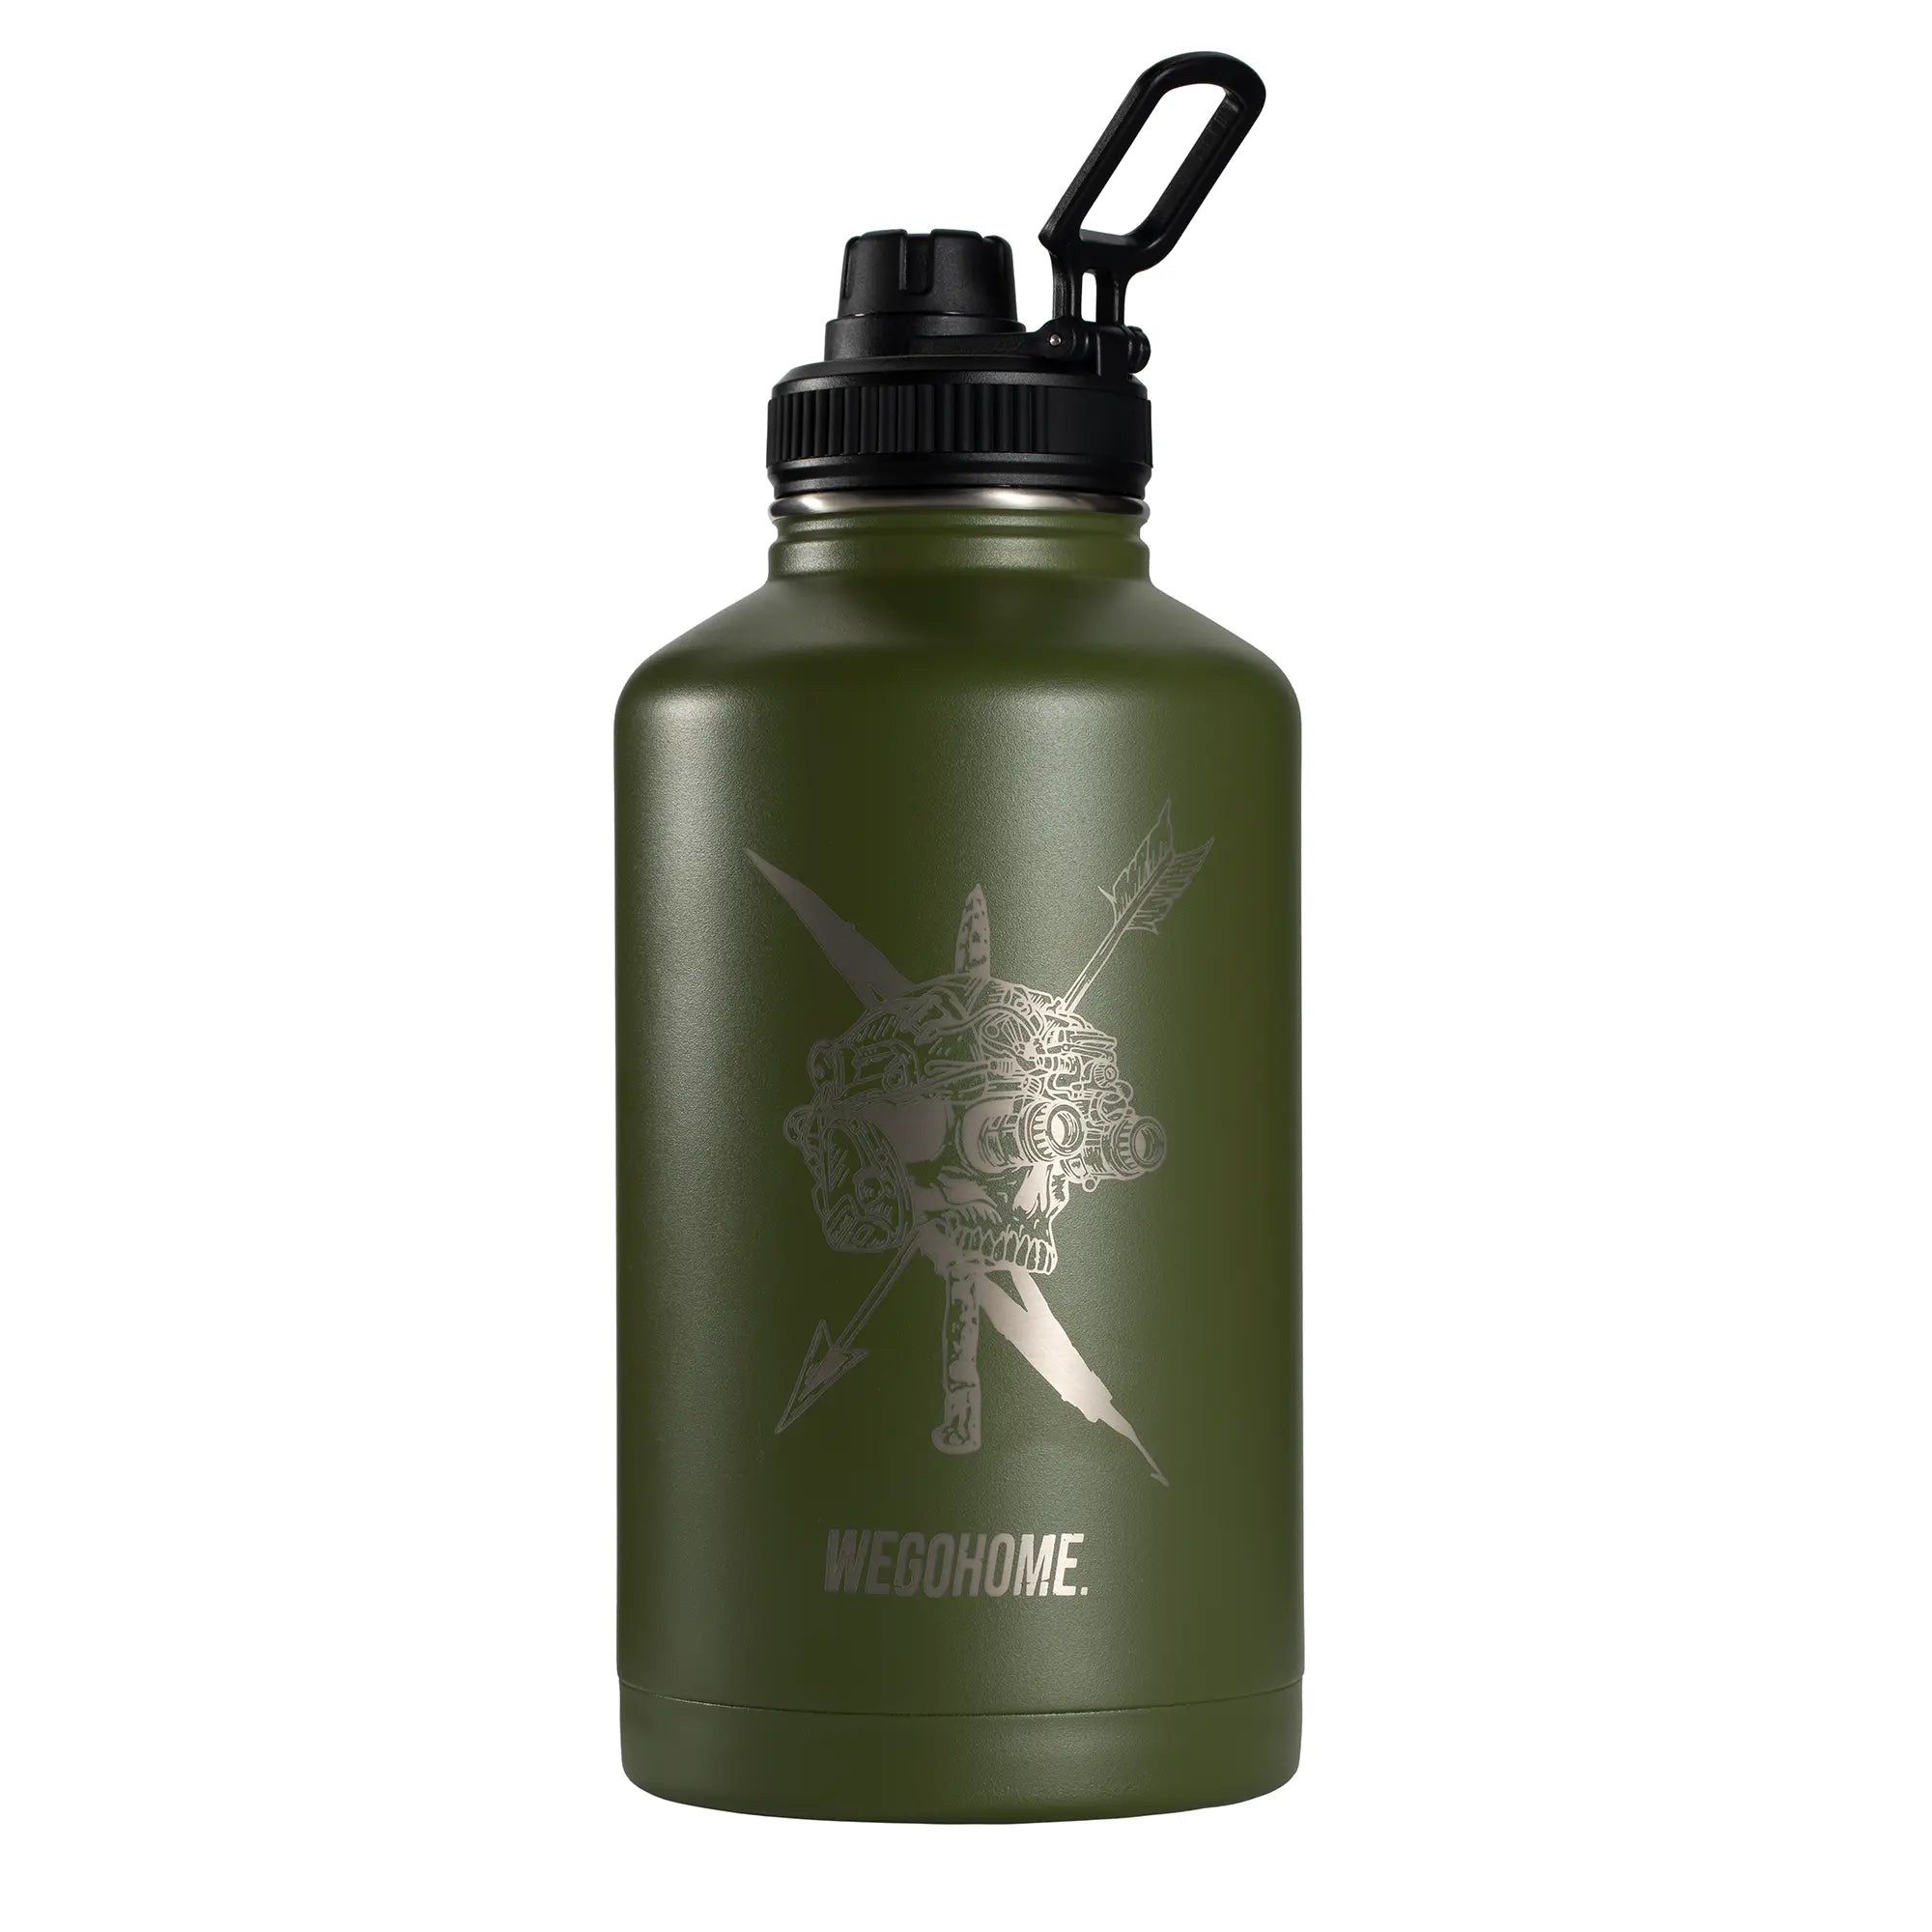 The Canteen 64 oz Bottle | We Go Home Supplements